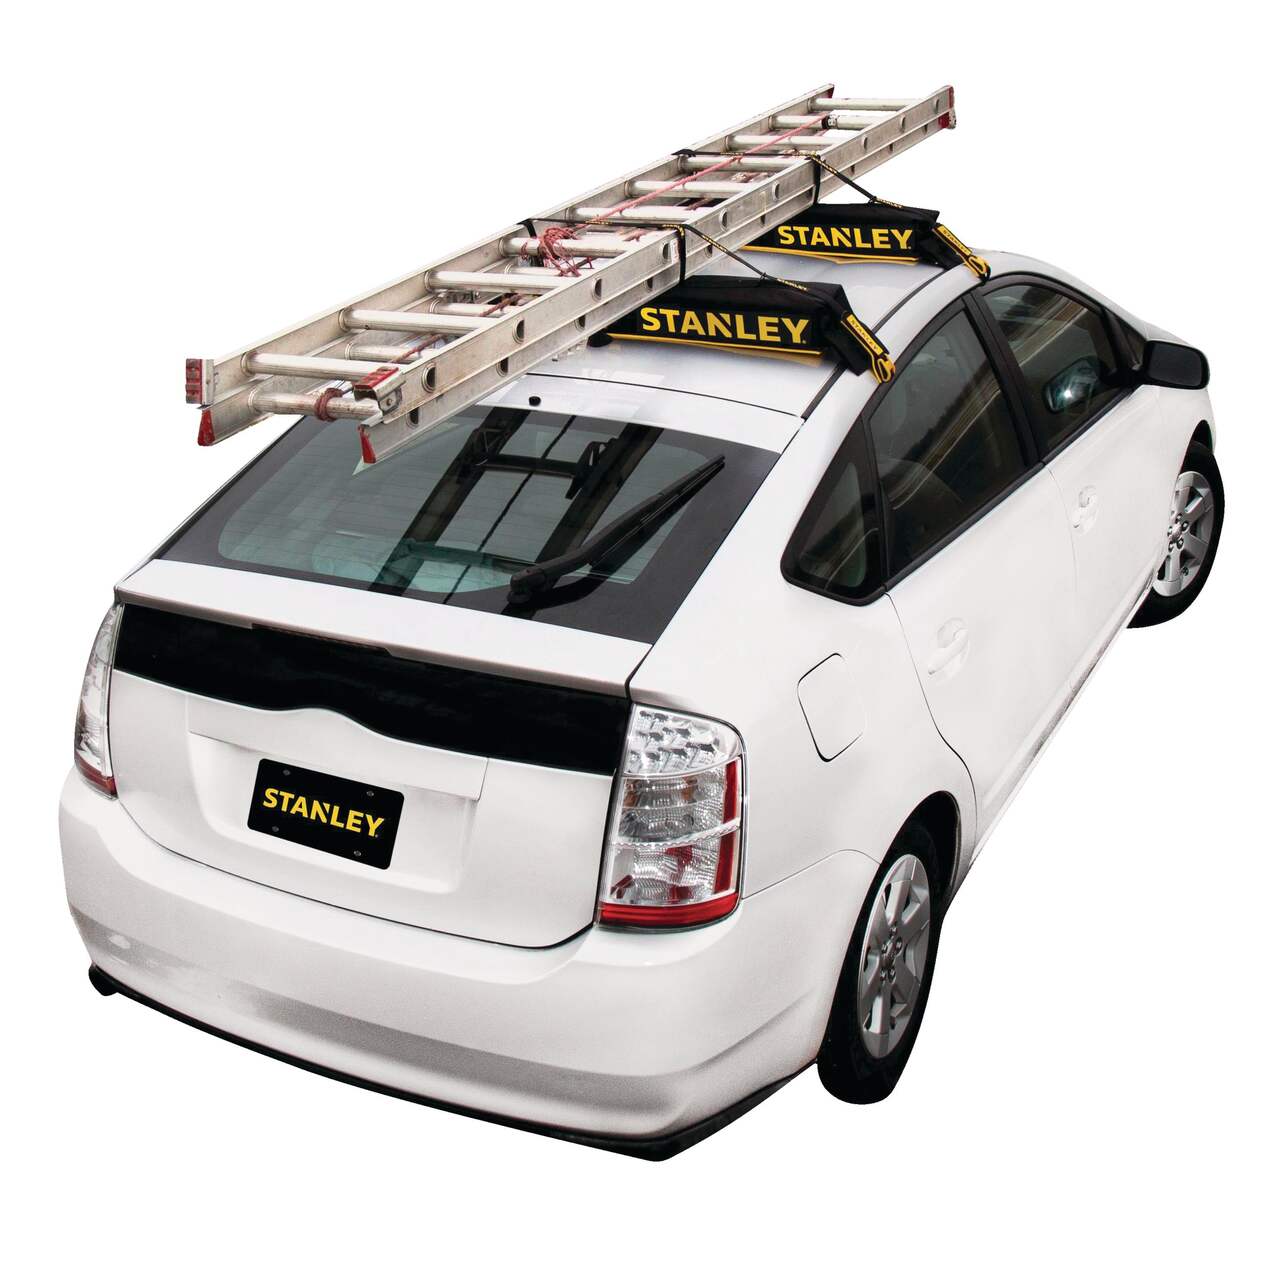 Stanley Roof Top Universal Rack Pad & Luggage Carrier System